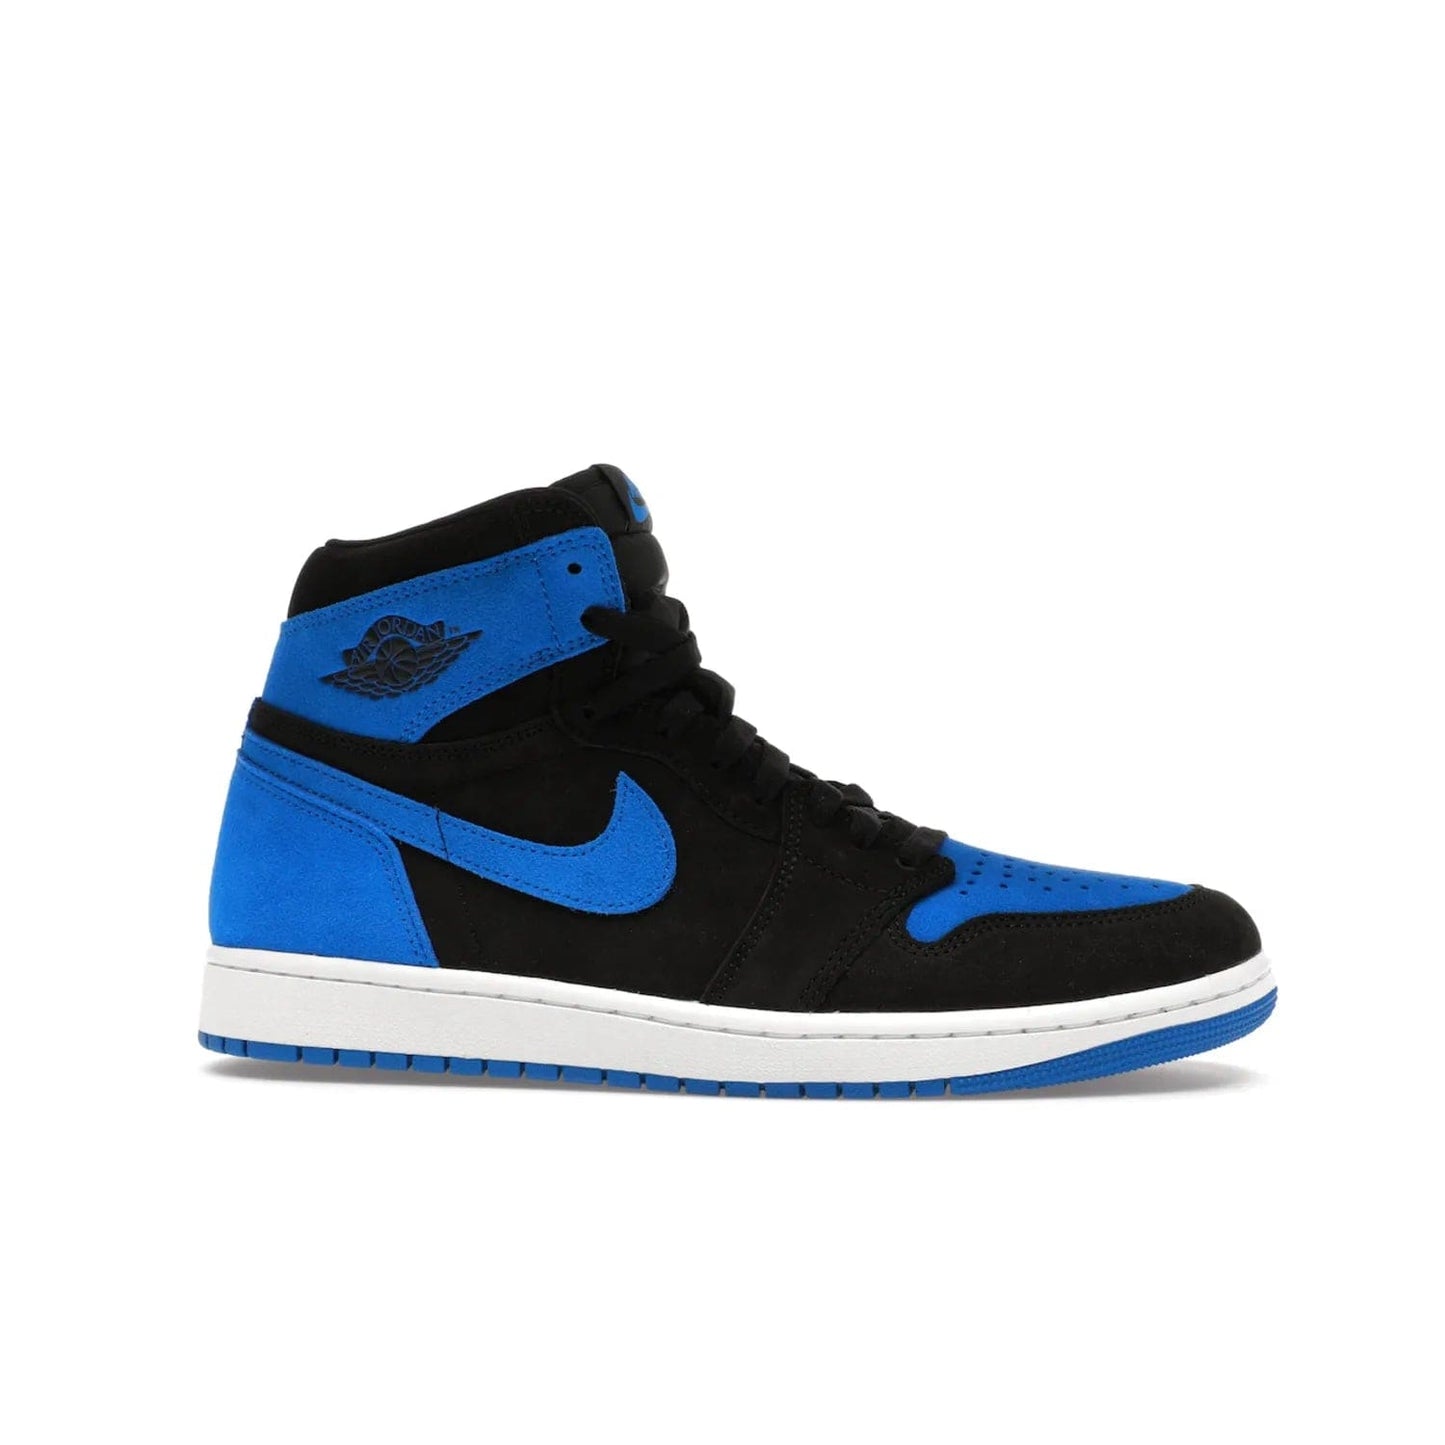 Jordan 1 Retro High OG Royal Reimagined - Image 2 - Only at www.BallersClubKickz.com - ####
Old meets the new: Jordan 1 Retro High OG 'Royal Reimagined' is a bold statement of evolution with its royal blue and black suede material makeup. Swoosh overlays, Wings logos, padded ankle collars and Nike Air tags maintain the OG's legendary lineage. Get a pair on November 4th and be part of a fearless, unyielding story.